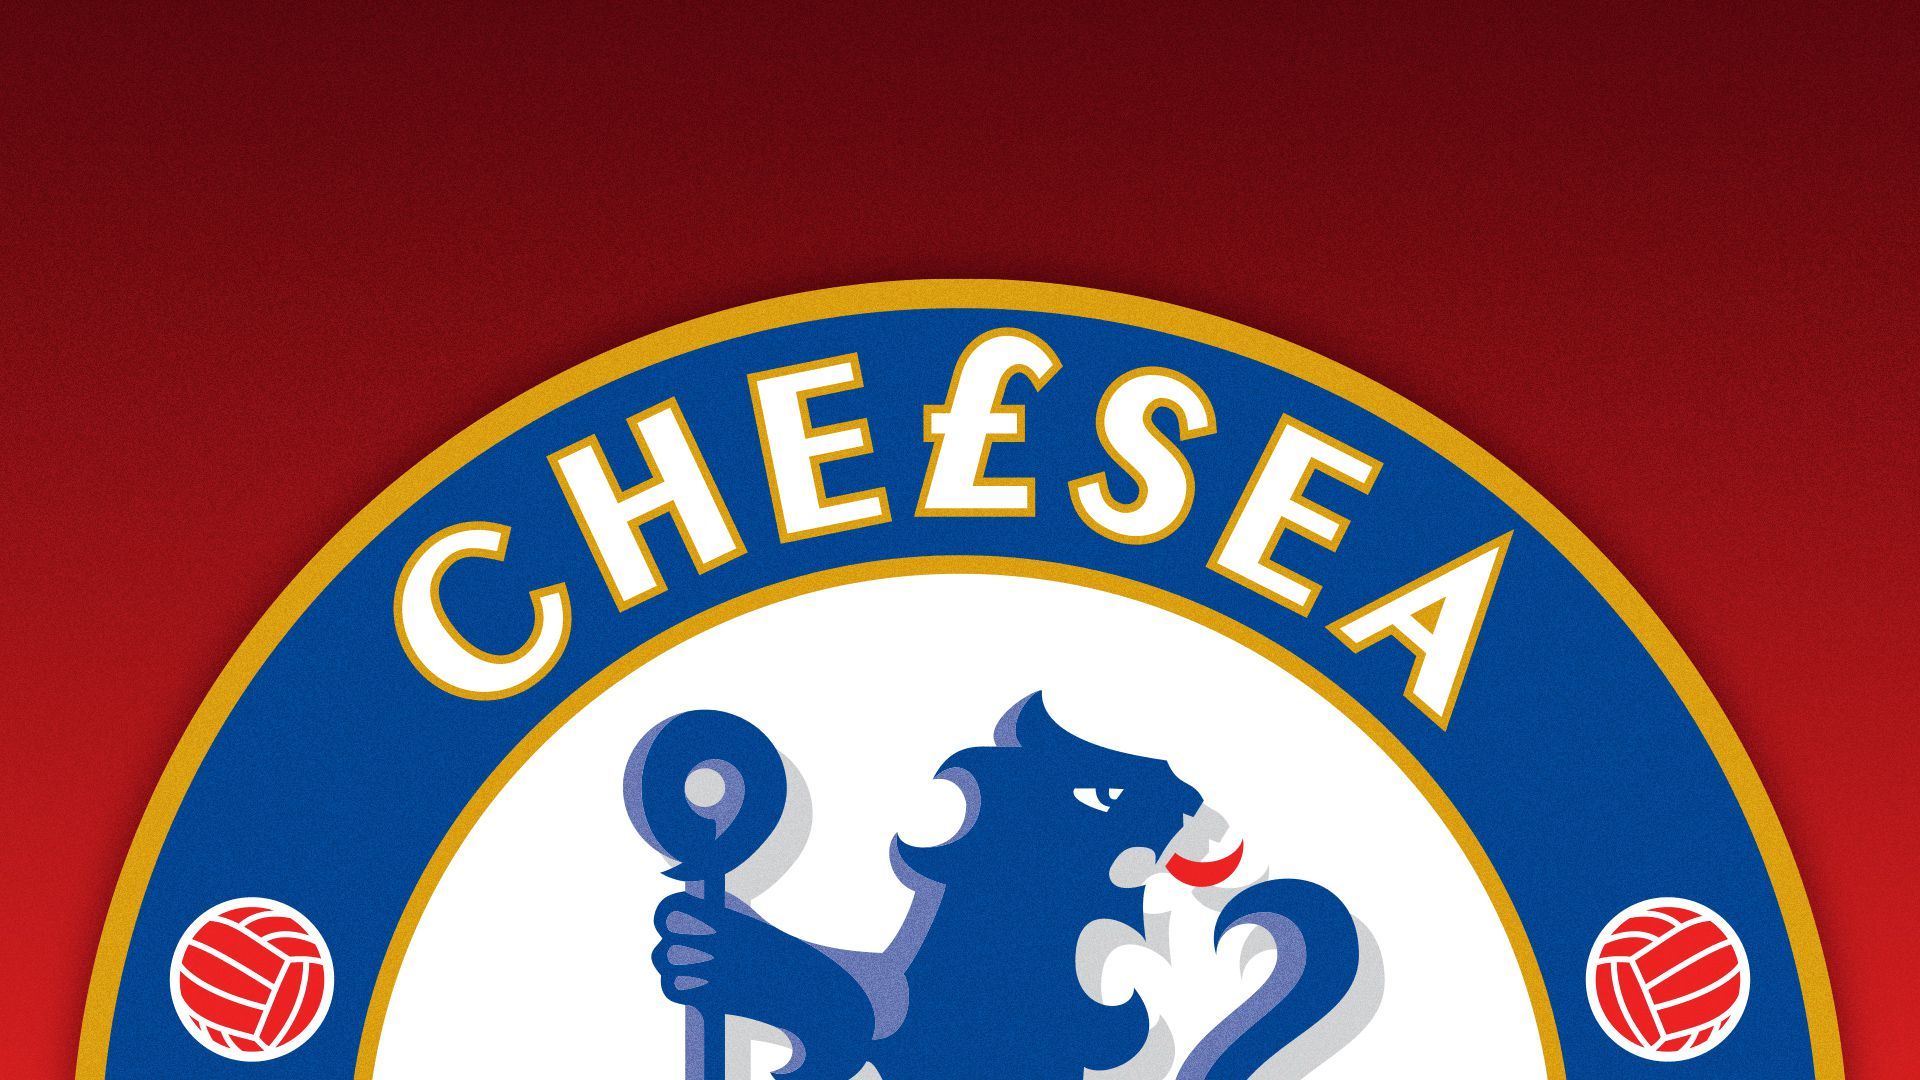 Illustration of the Chelsea FC logo with the "L" replaced with a "£"